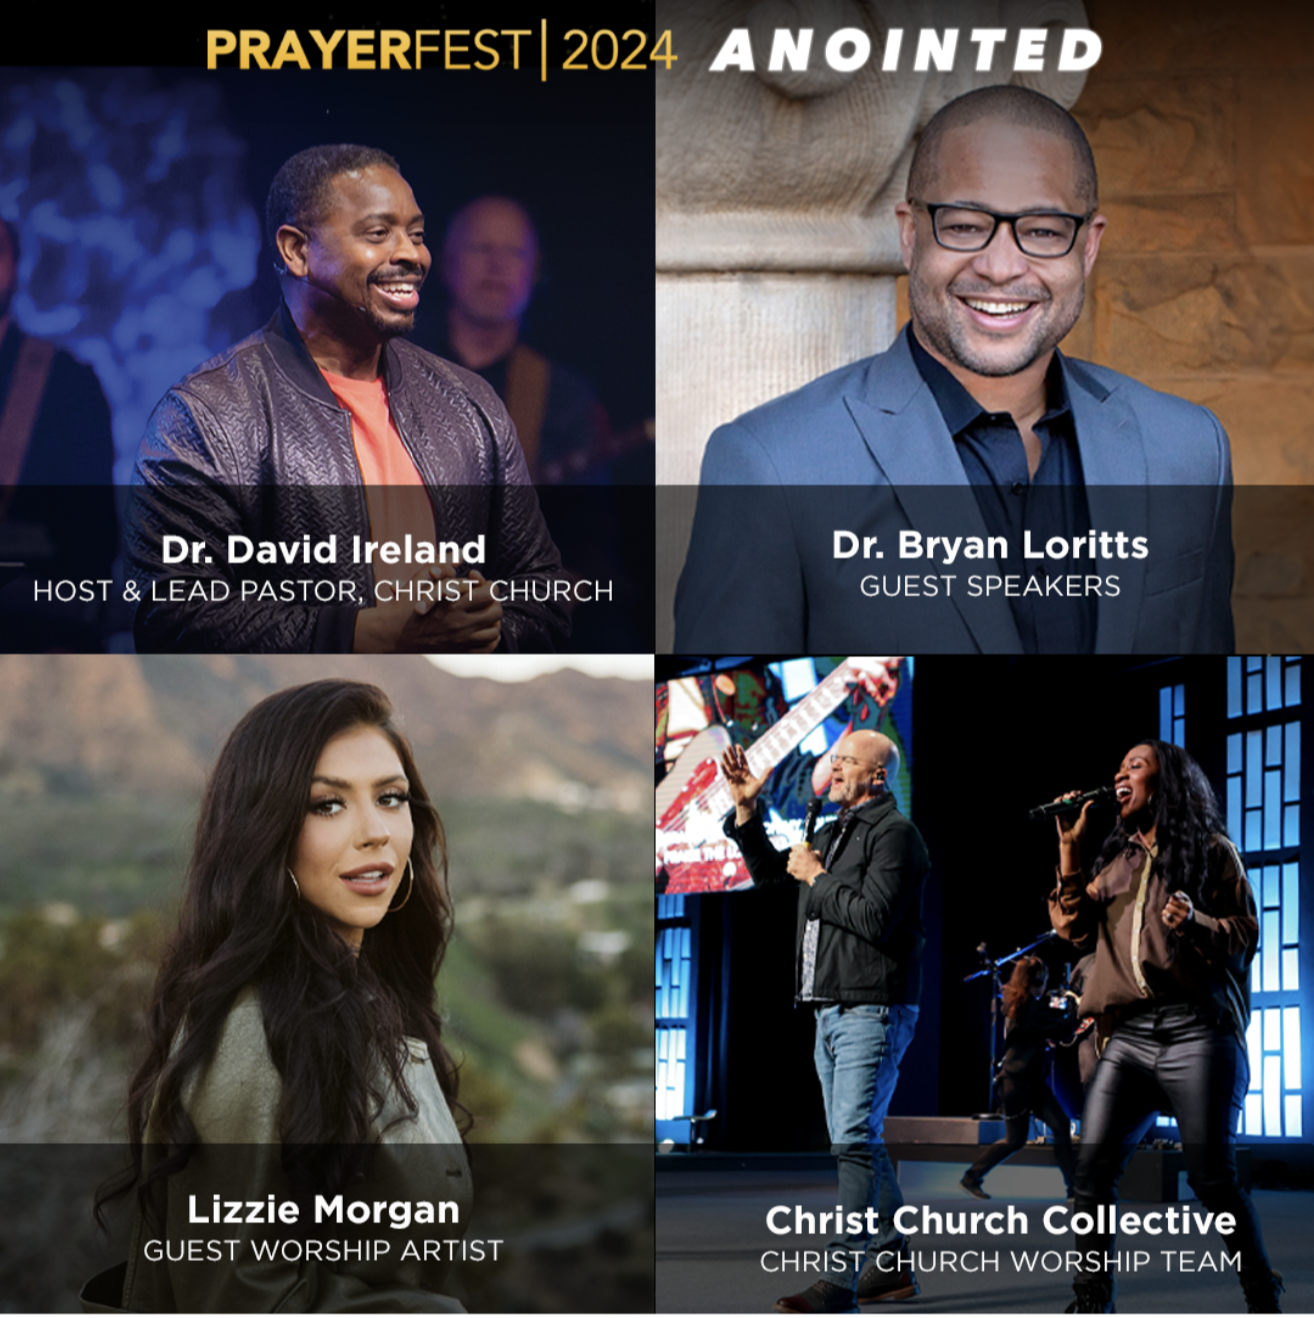 Christ Church’s Largest Annual Gathering Welcomes Thousands for Prayerfest 2024